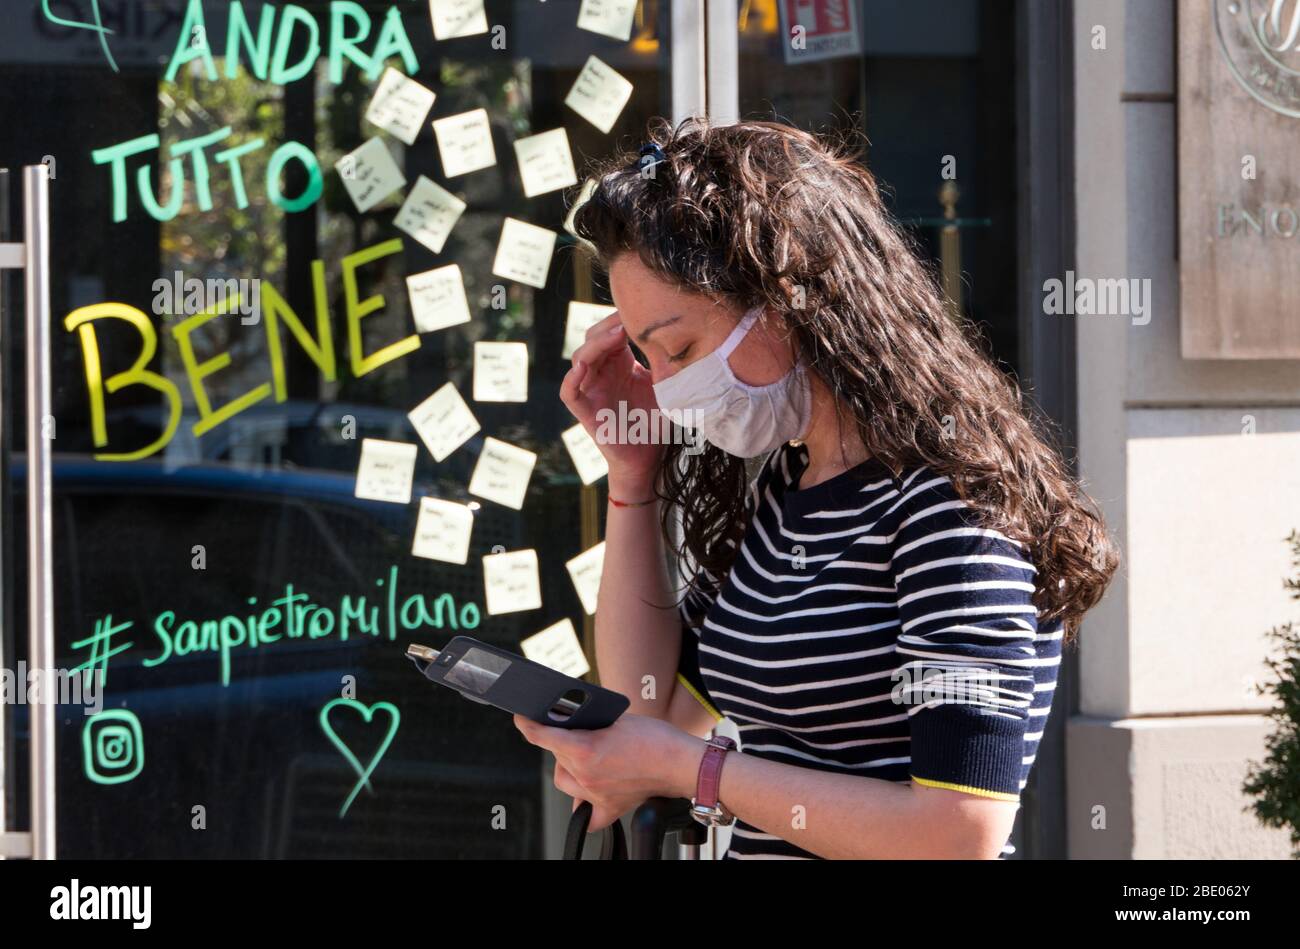 Young woman with mask and waiting in queue to enter supermarket in Milan, Italy during coronavirus crisis. Andrà tutto bene - Everything will be fine Stock Photo